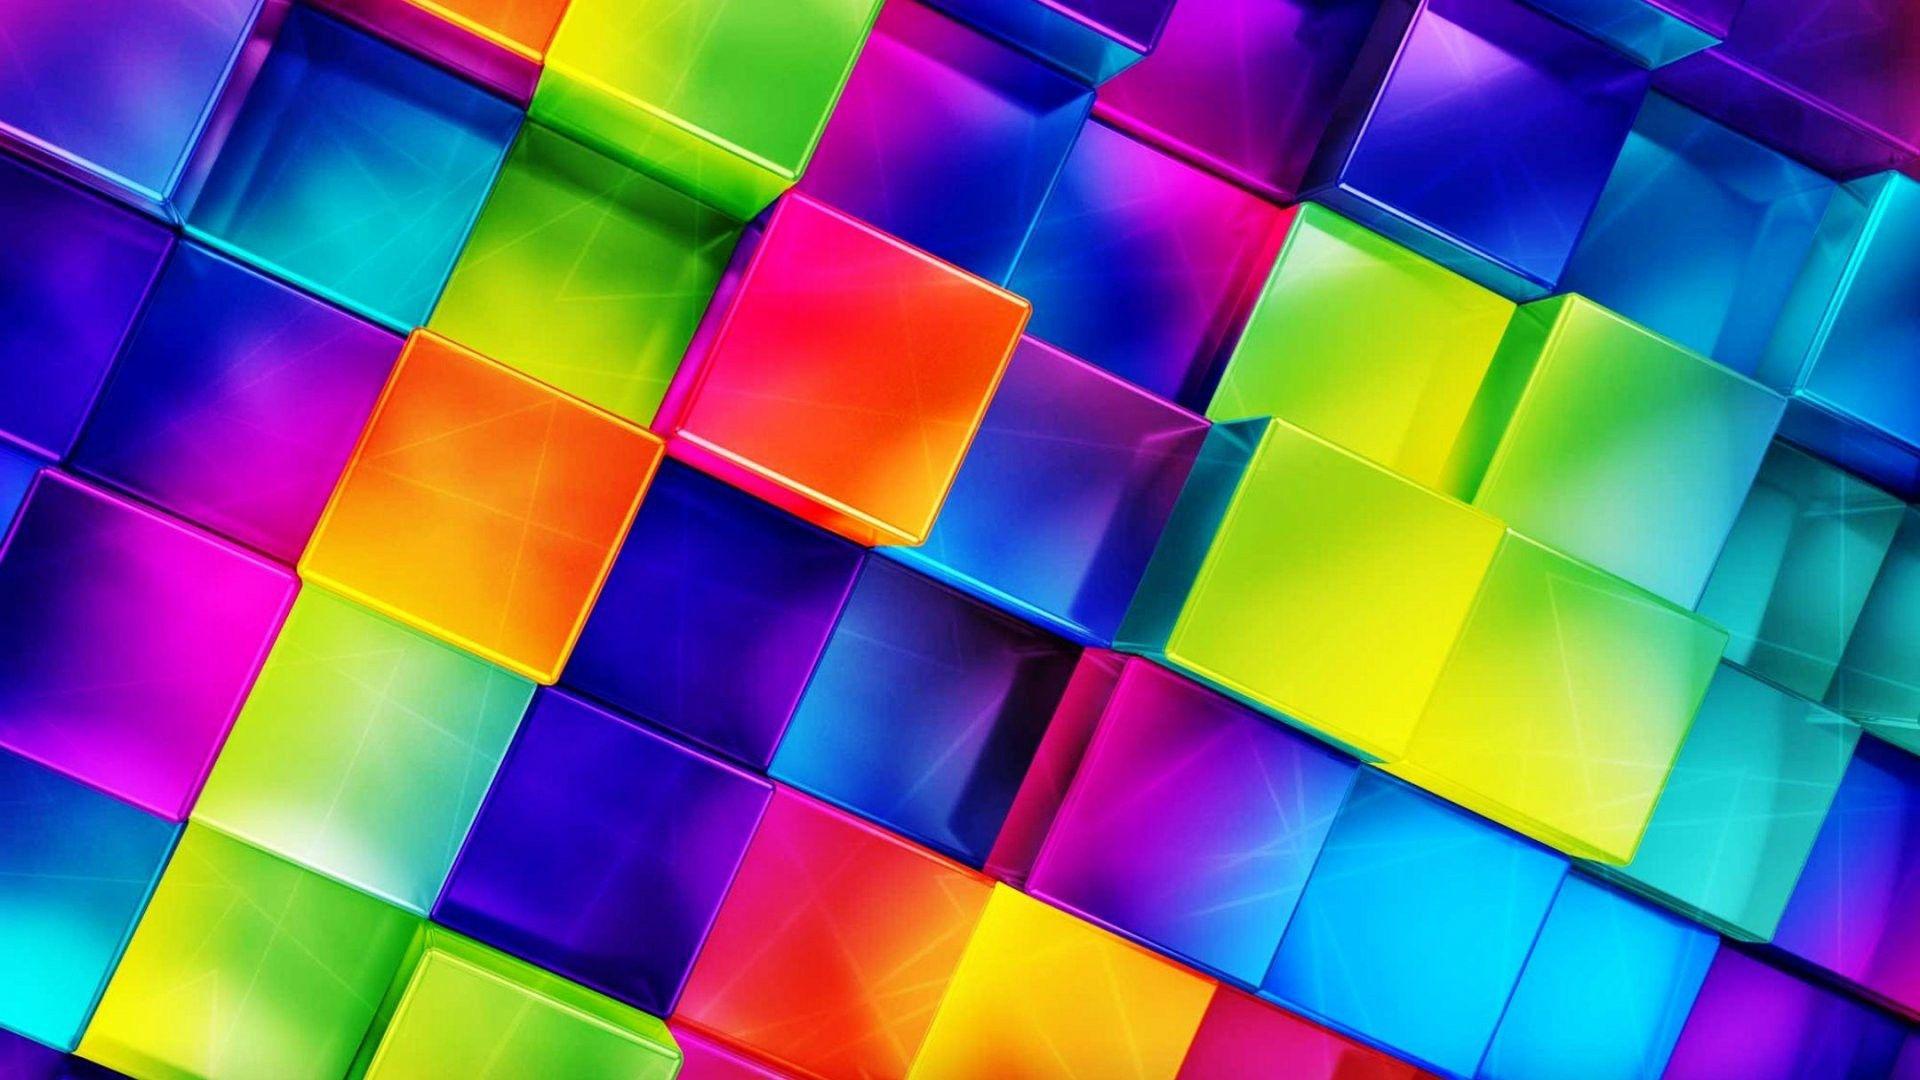 Bright Colorful Abstract Wallpapers Top Free Bright Colorful Abstract